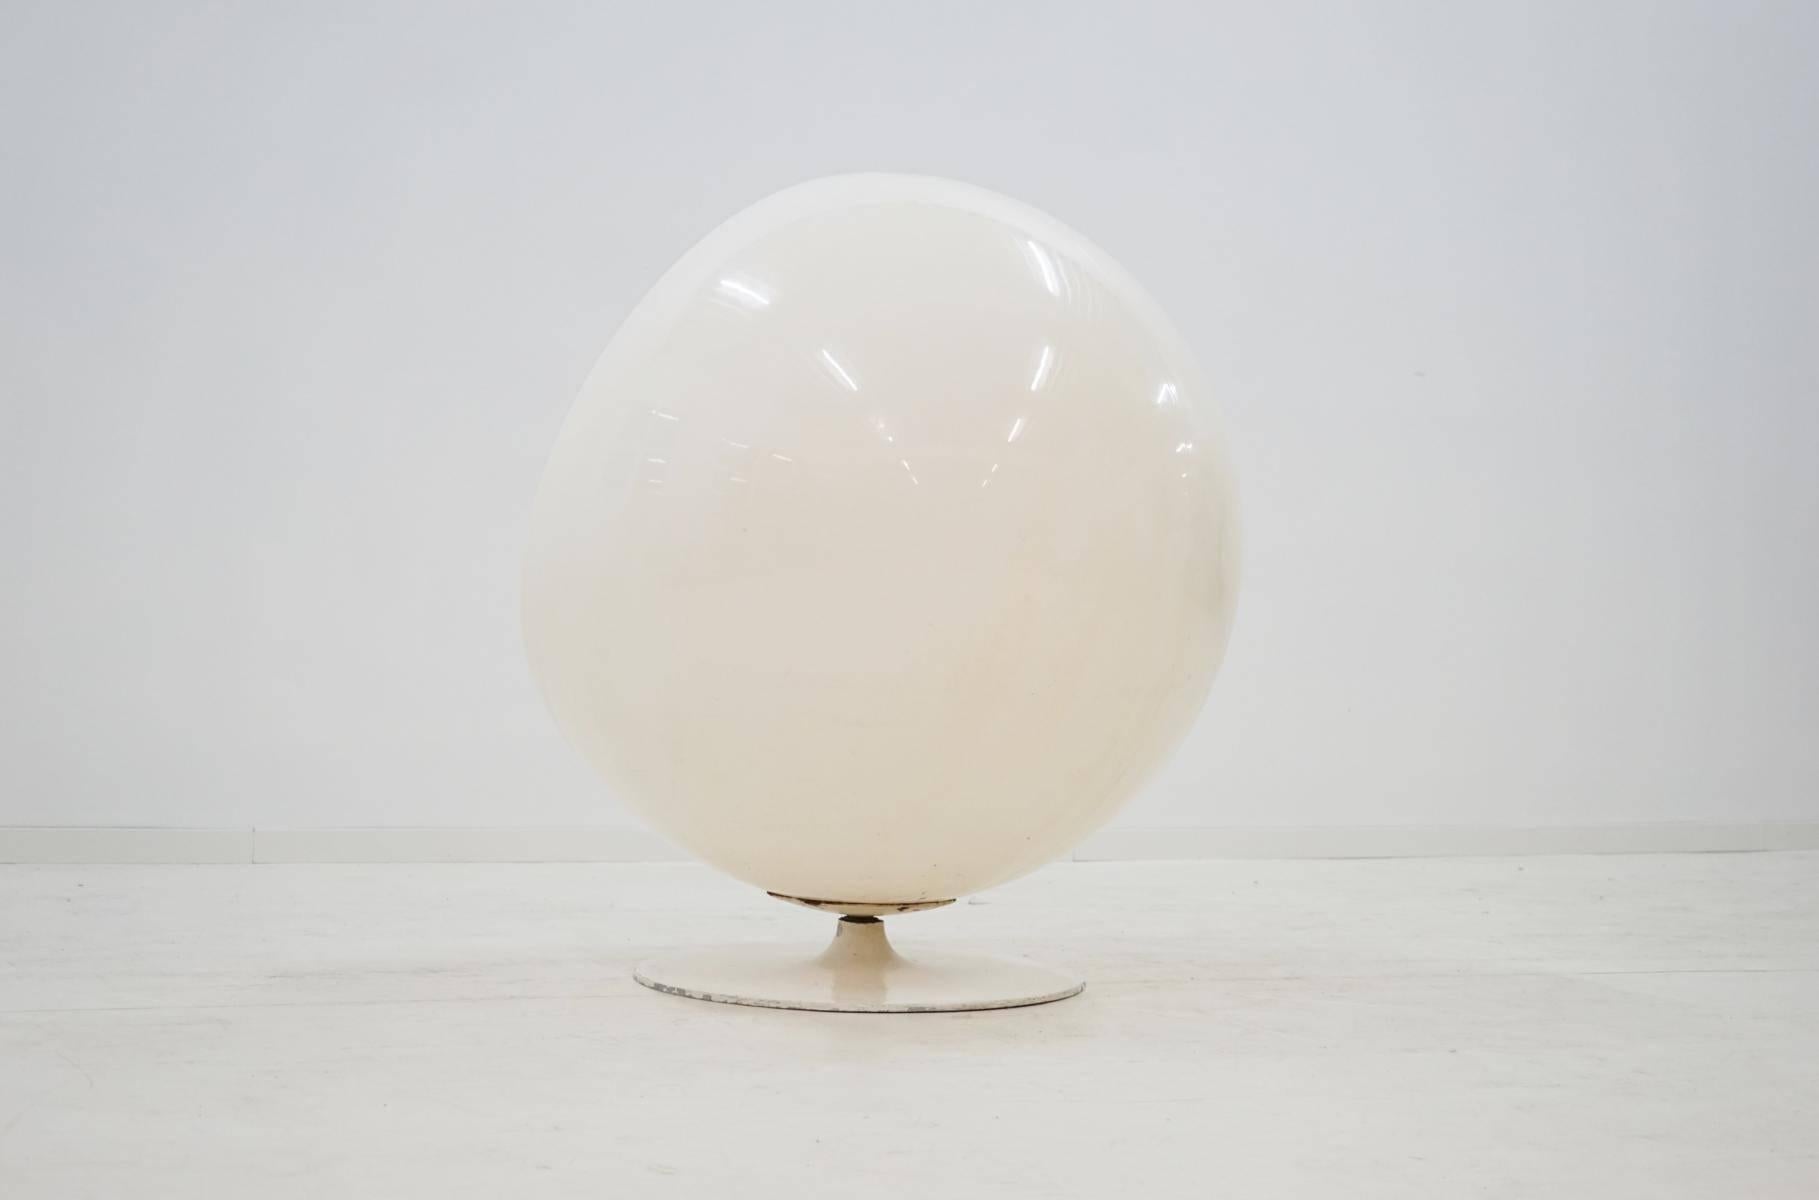 Original ball chair by Eero Aarnio Asko
Leather, 1960s.

